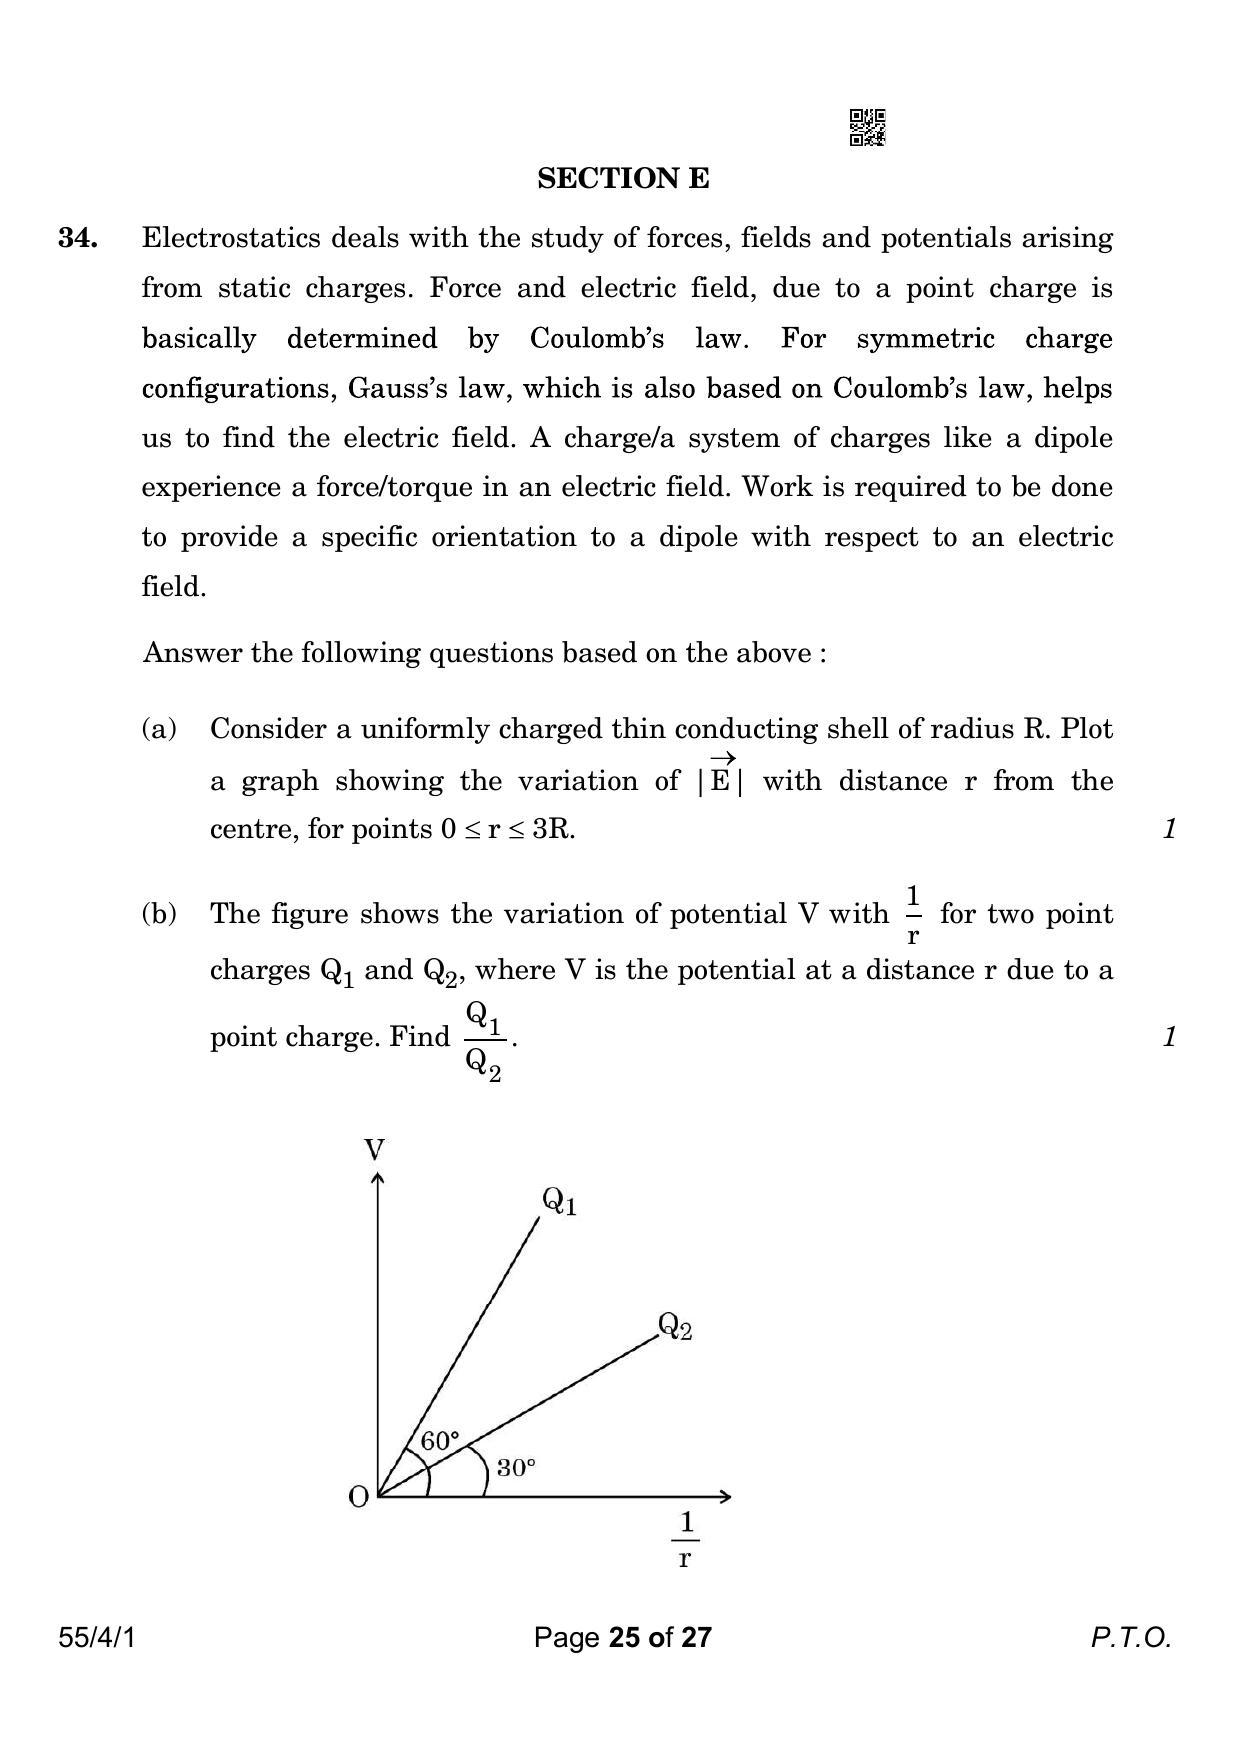 CBSE Class 12 55-4-1 Physics 2023 Question Paper - Page 25